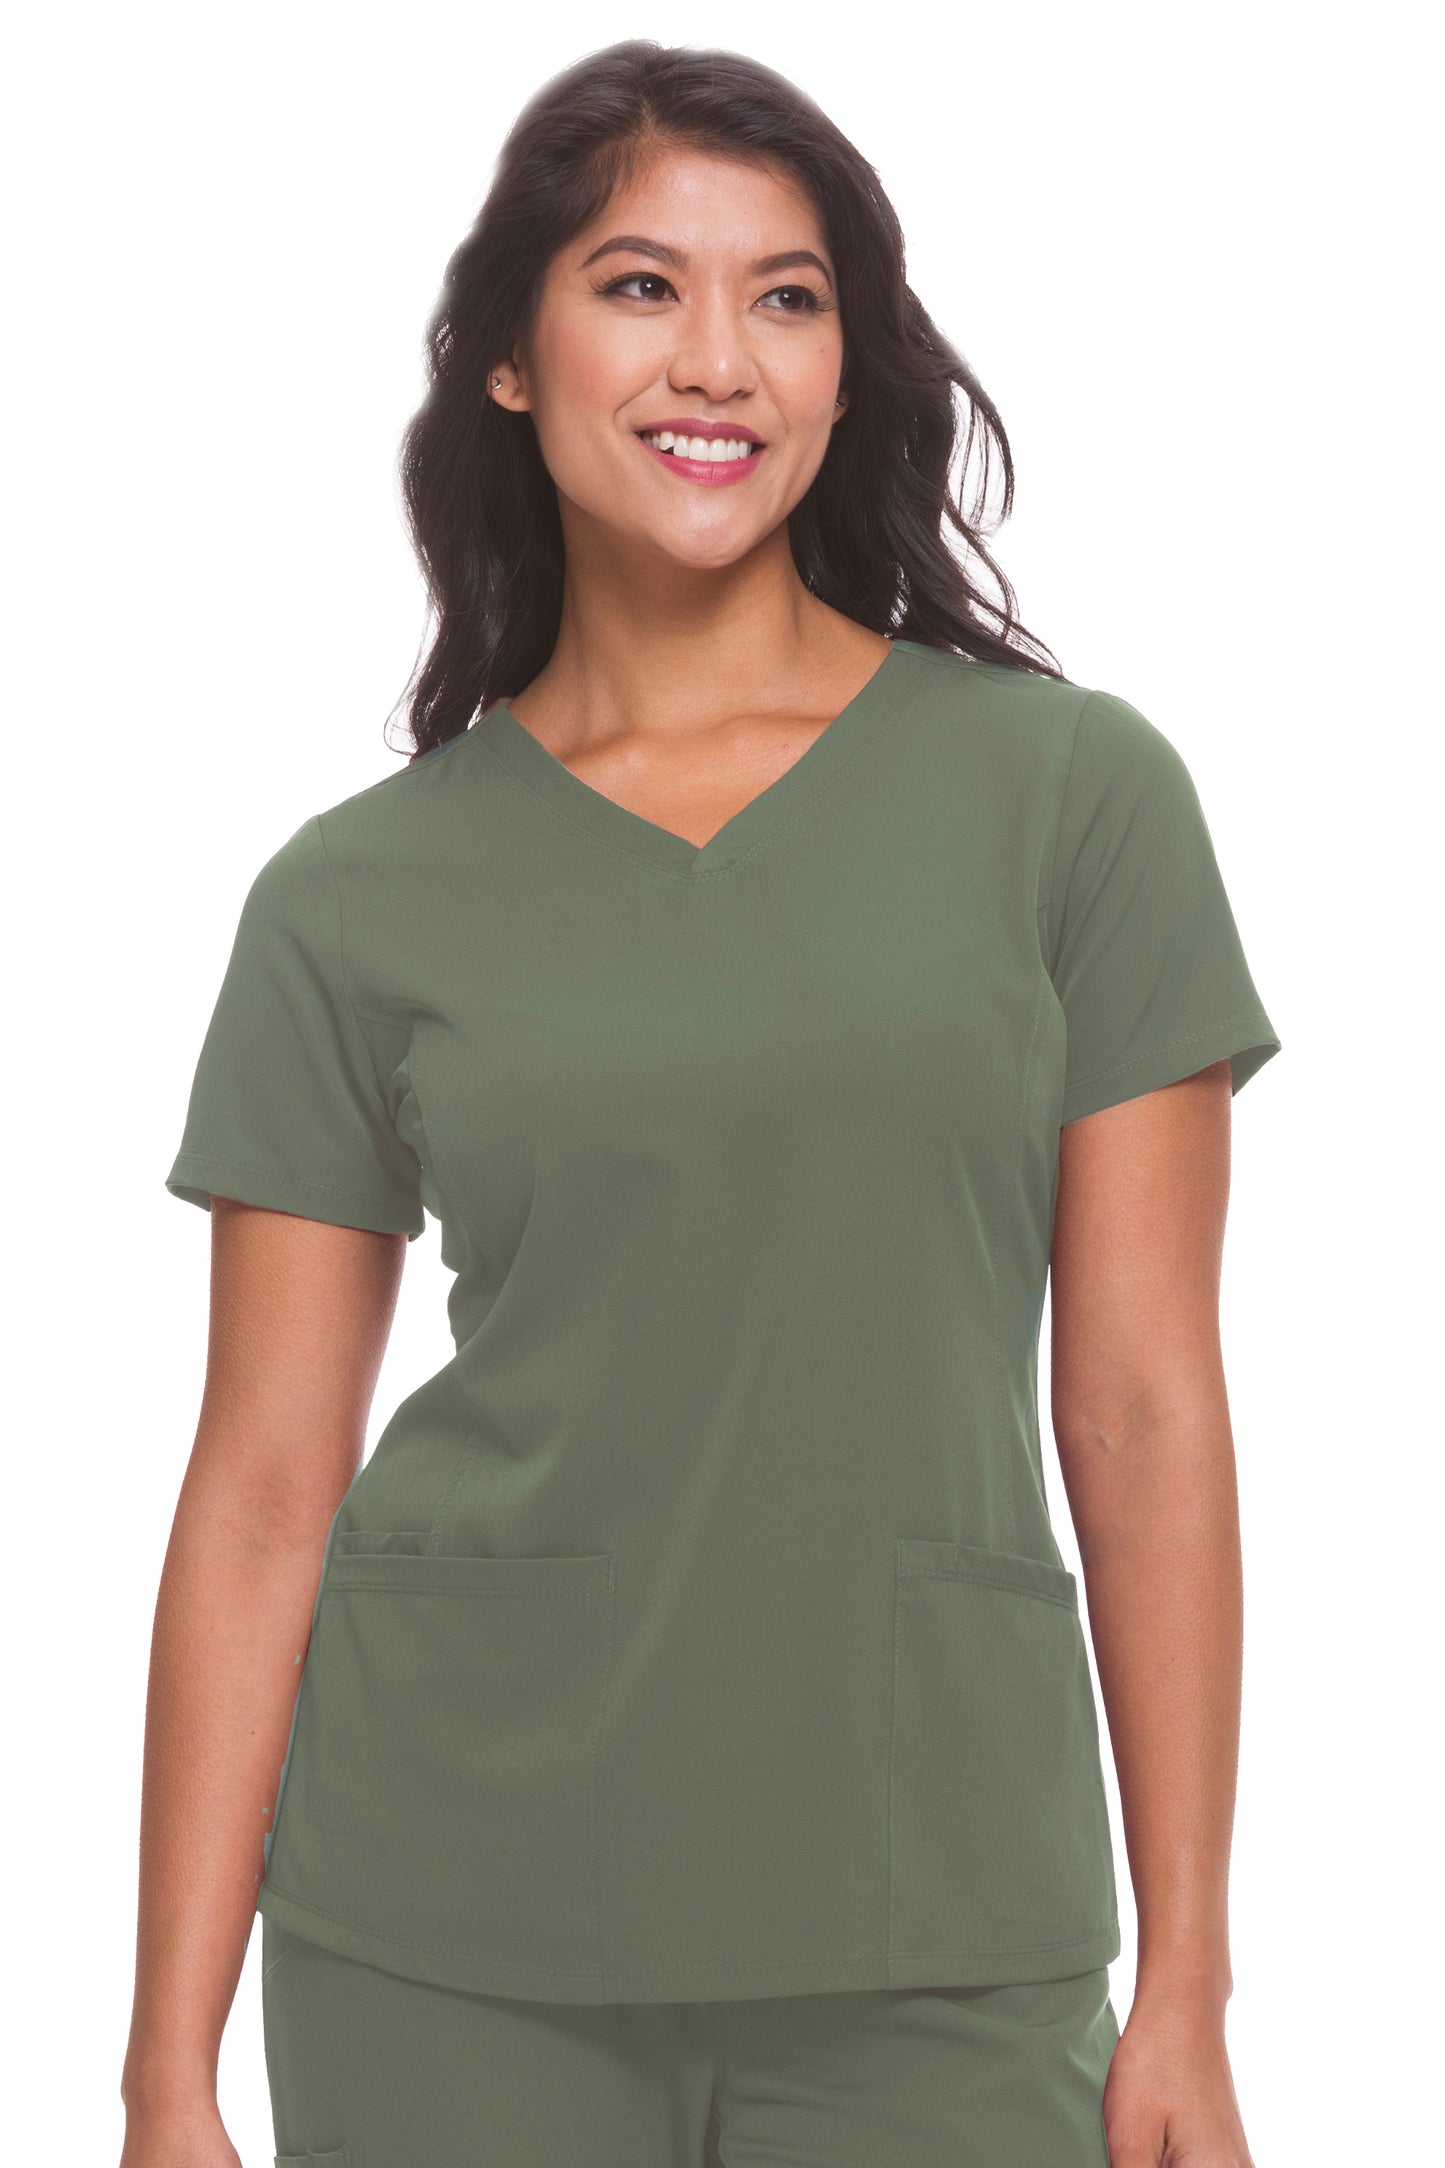 Healing Hands HH Works Monica V-Neck Scrub Top in Olive at Parker's Clothing and Shoes